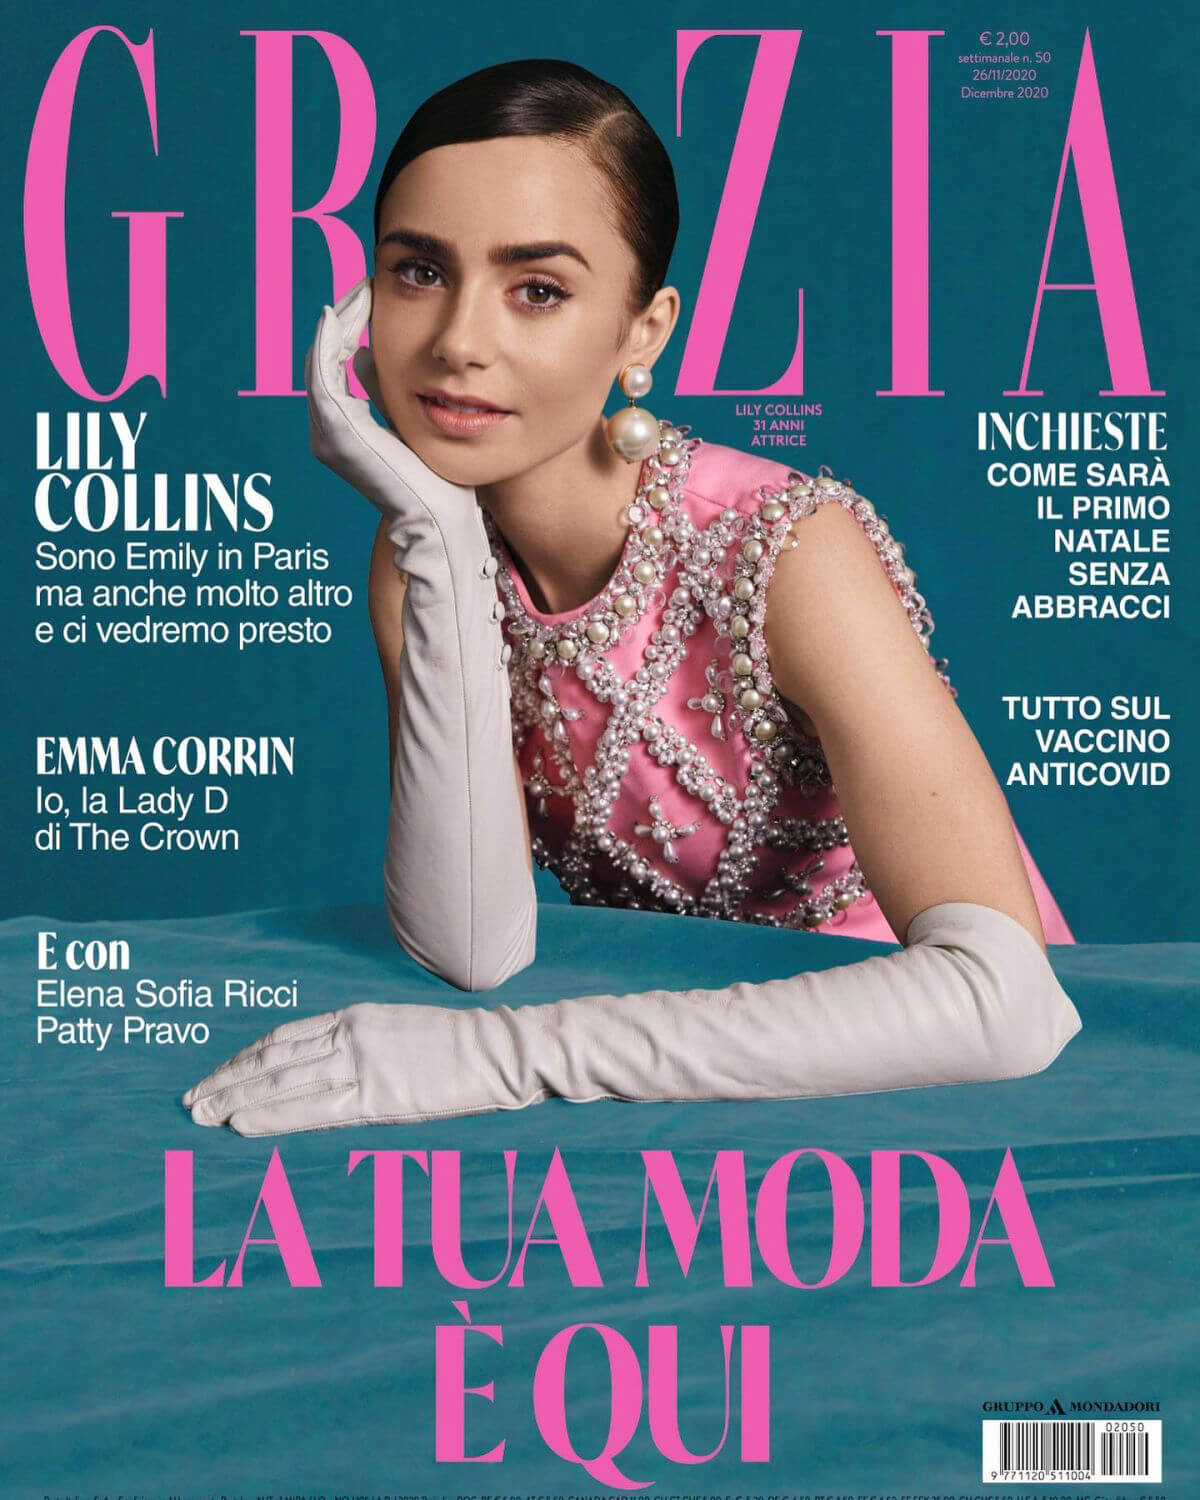 Lily Collins Photoshoot on the Cover of Grazia Magazine, Italy December 2020